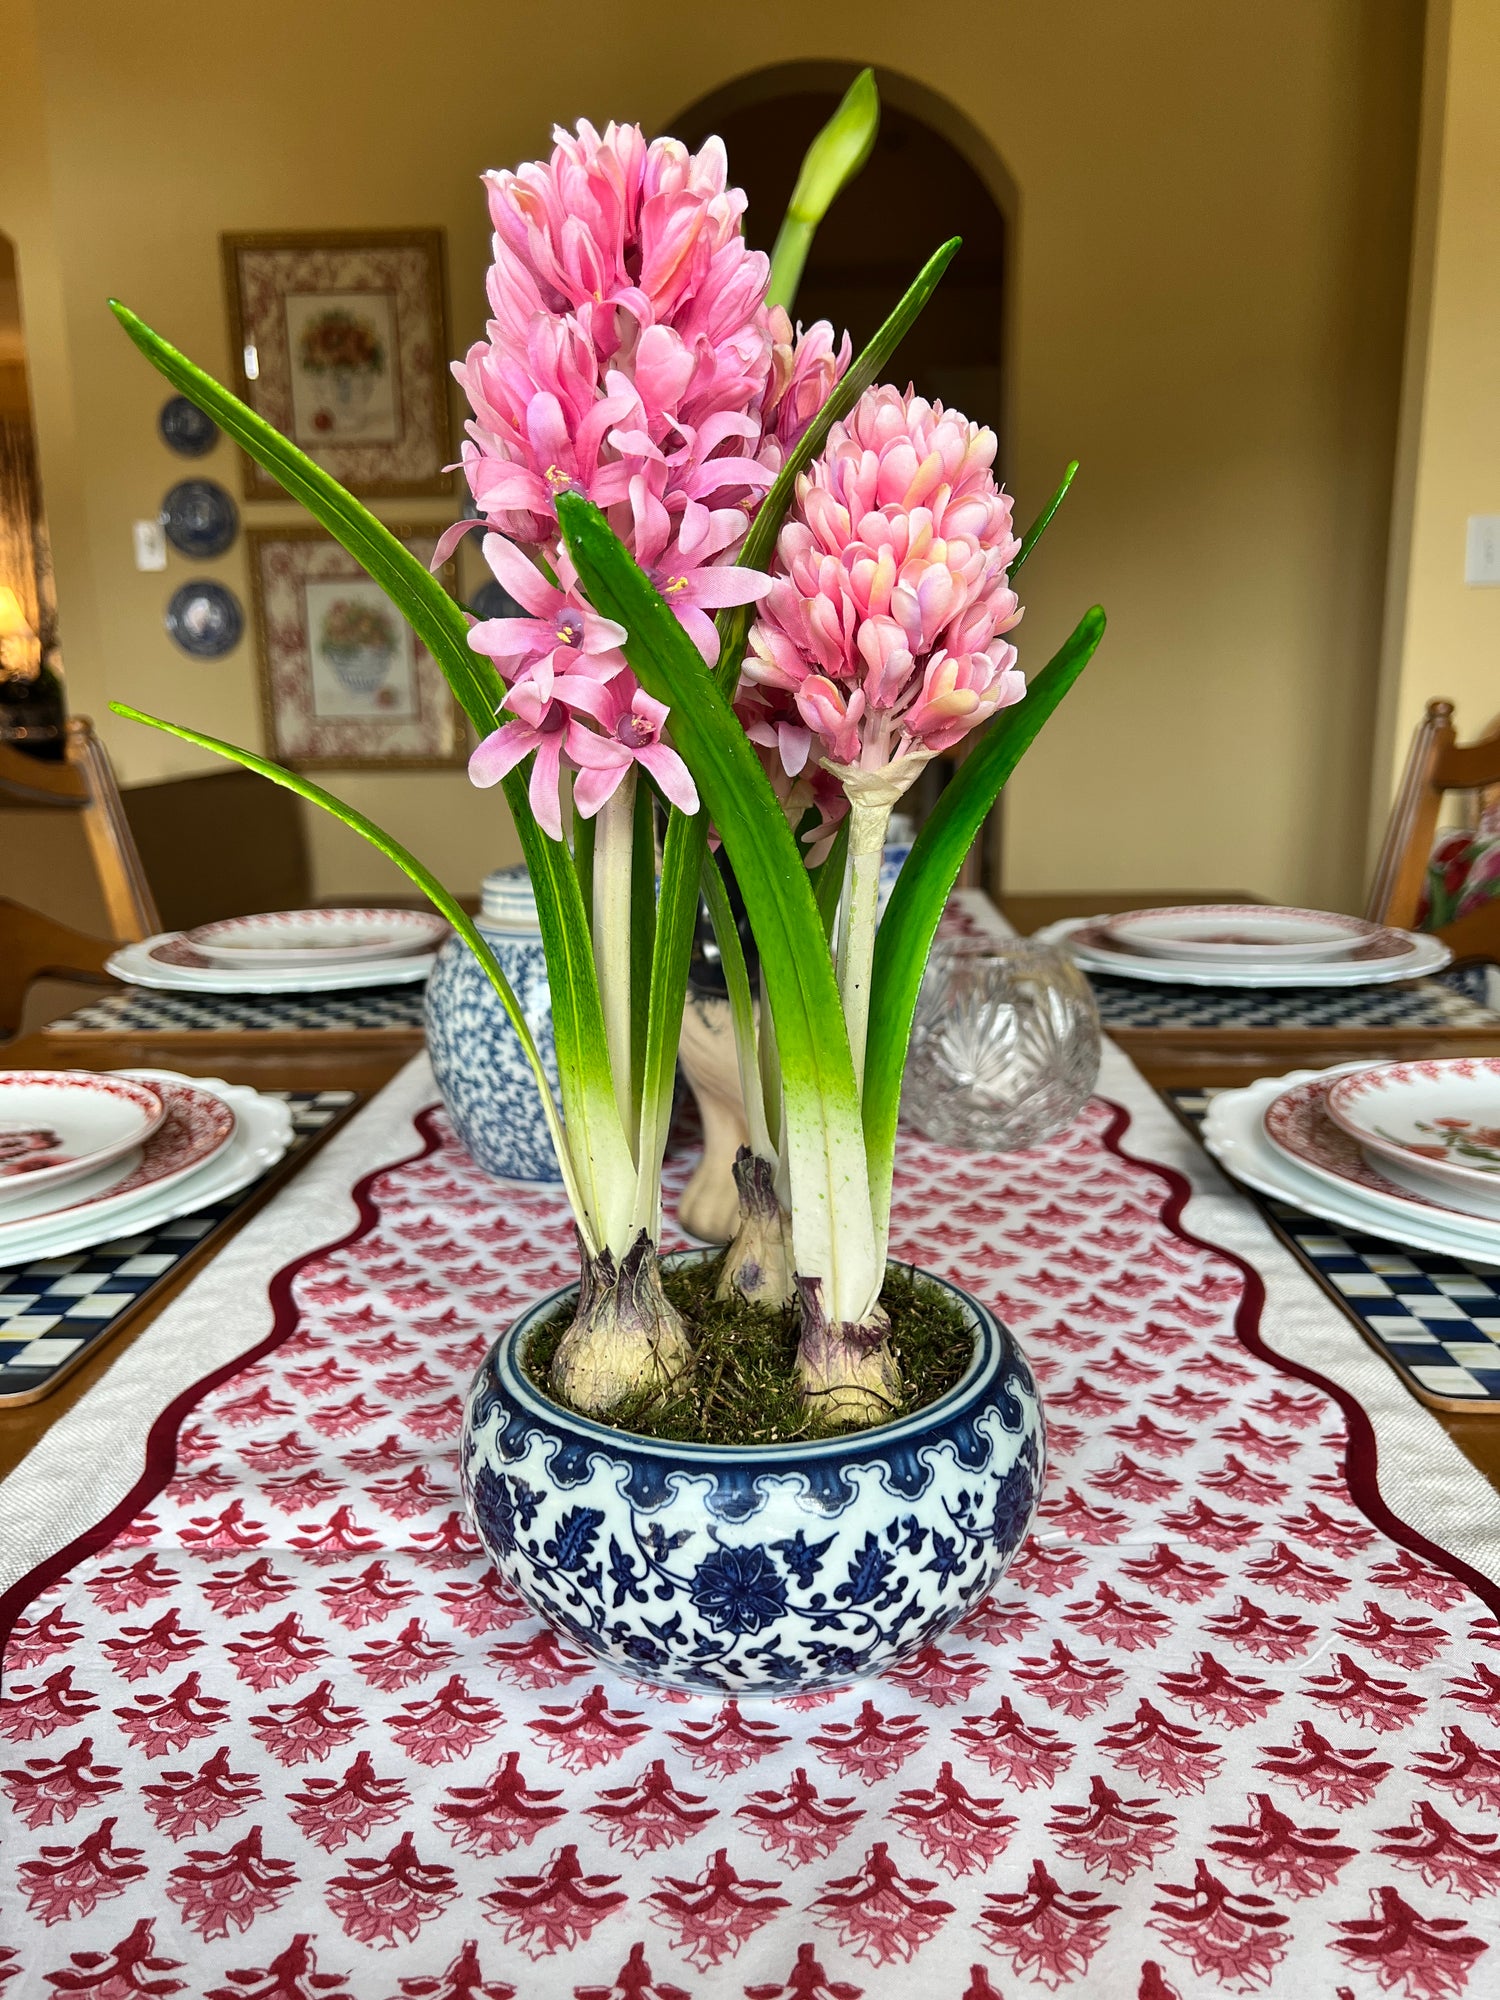 Faux Hyacinth bulbs in blue and white chinoiserie planter